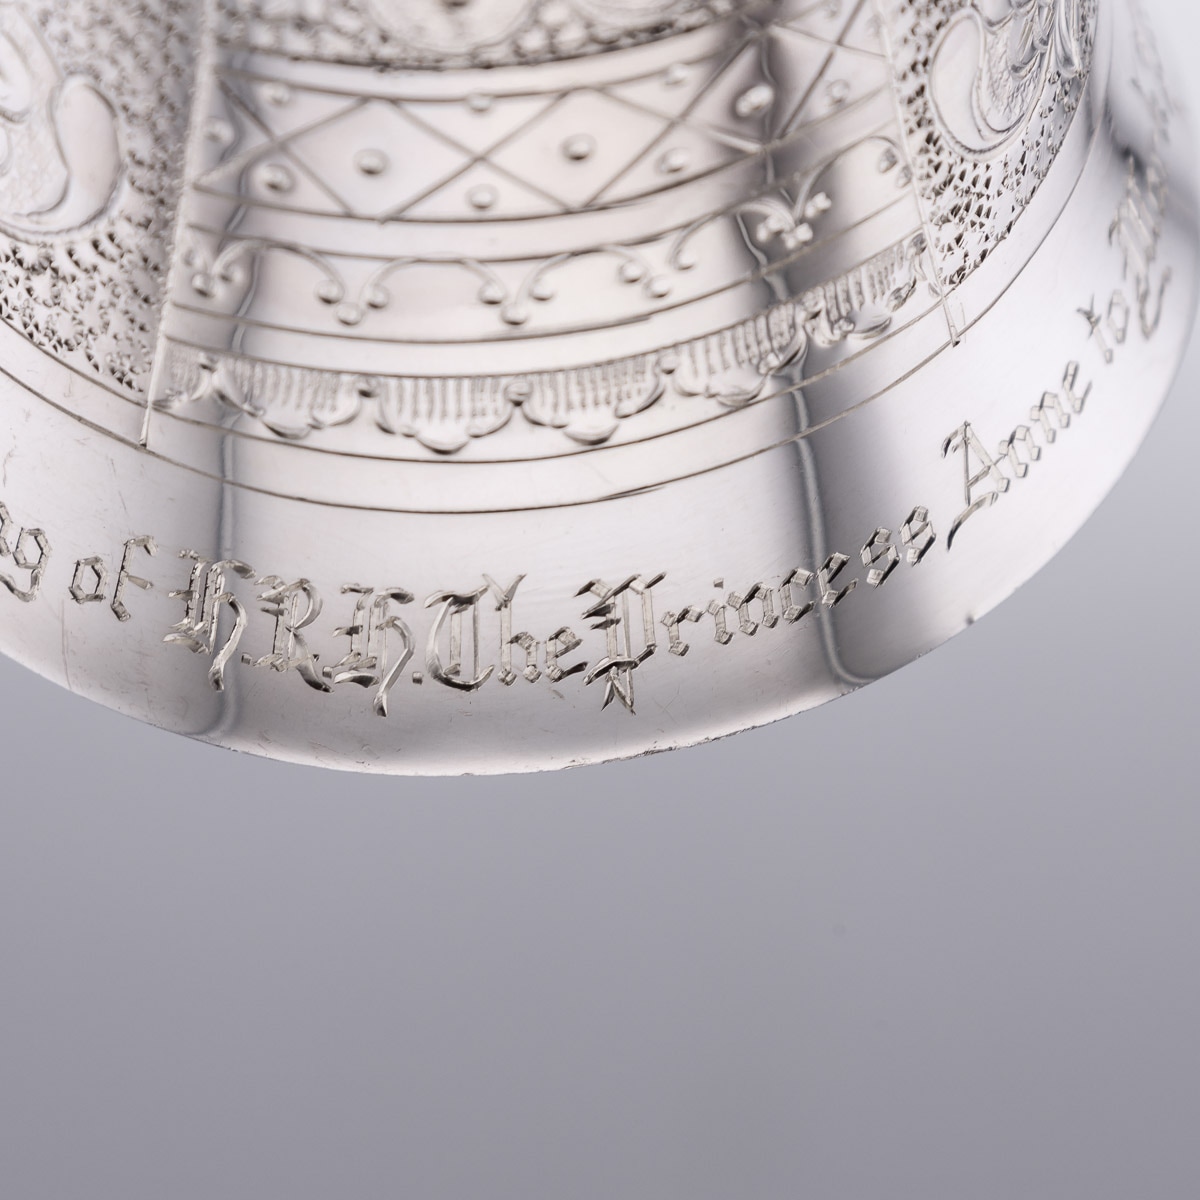 A ROYAL WEDDING SOLID STERLING SILVER NOVELTY WAGER CUP, LONDON, C. 1973 - Image 14 of 23